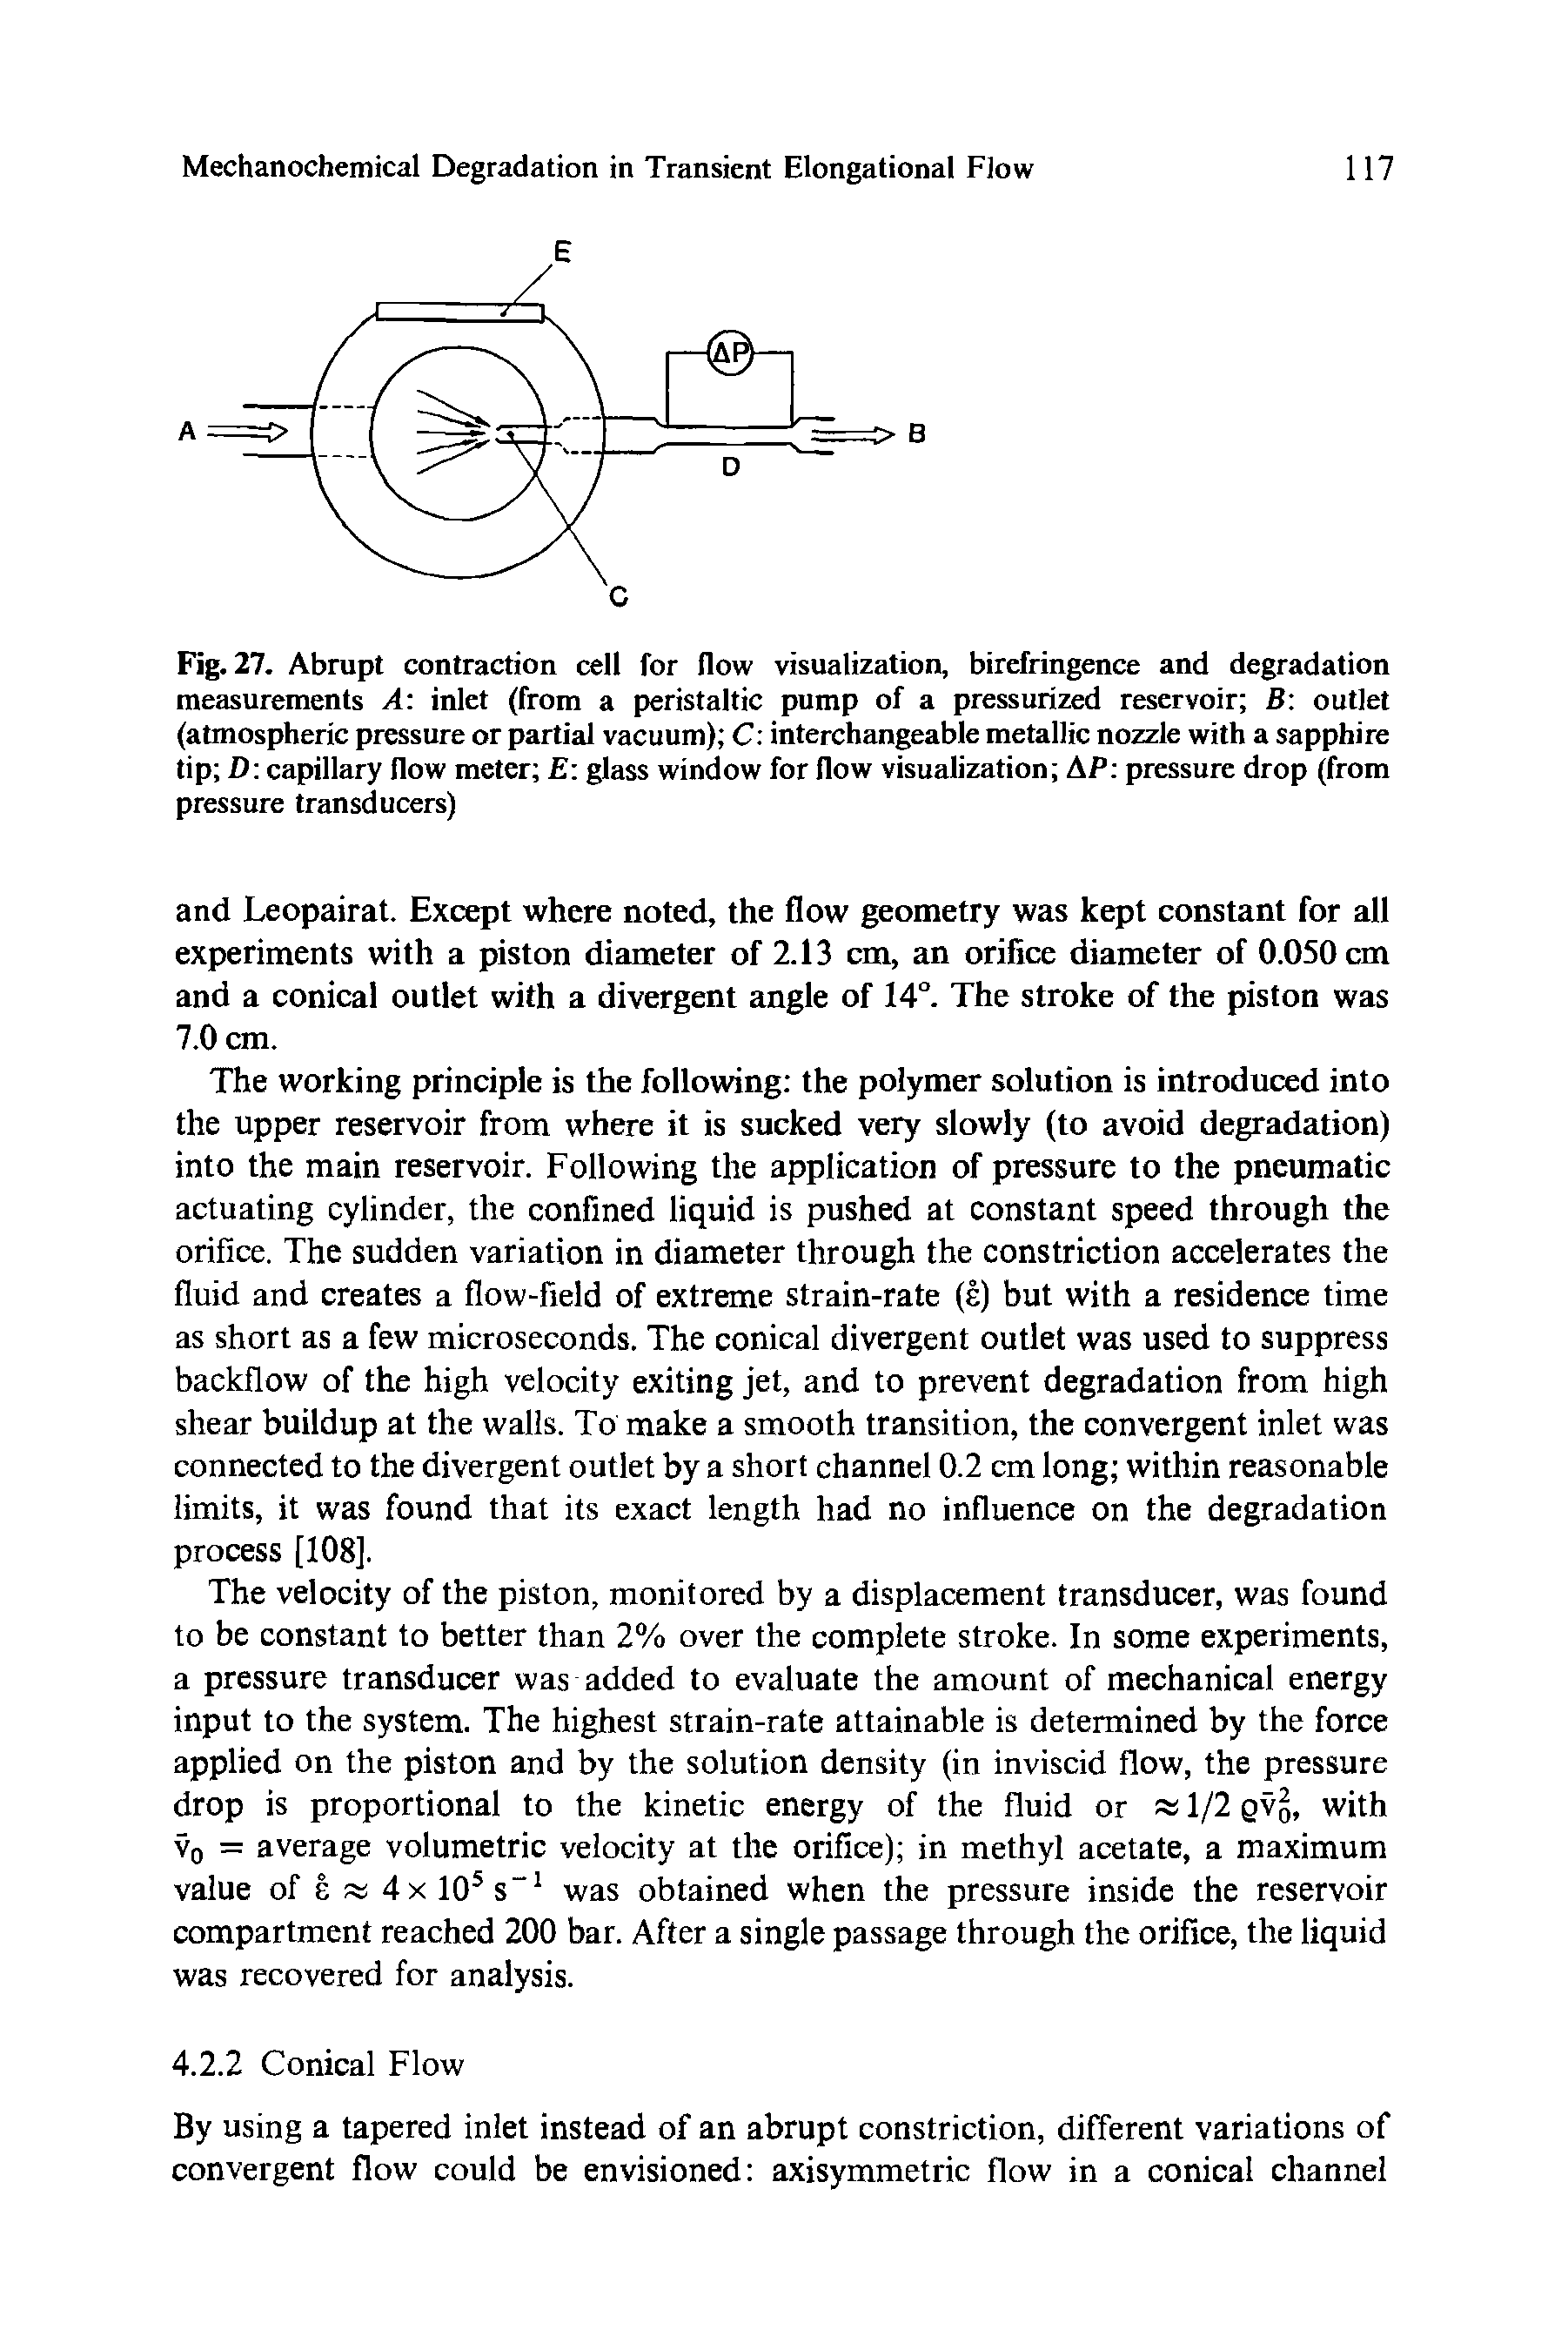 Fig. 27. Abrupt contraction cell for flow visualization, birefringence and degradation measurements A inlet (from a peristaltic pump of a pressurized reservoir B outlet (atmospheric pressure or partial vacuum) C interchangeable metallic nozzle with a sapphire tip D capillary flow meter E glass window for flow visualization AP pressure drop (from pressure transducers)...